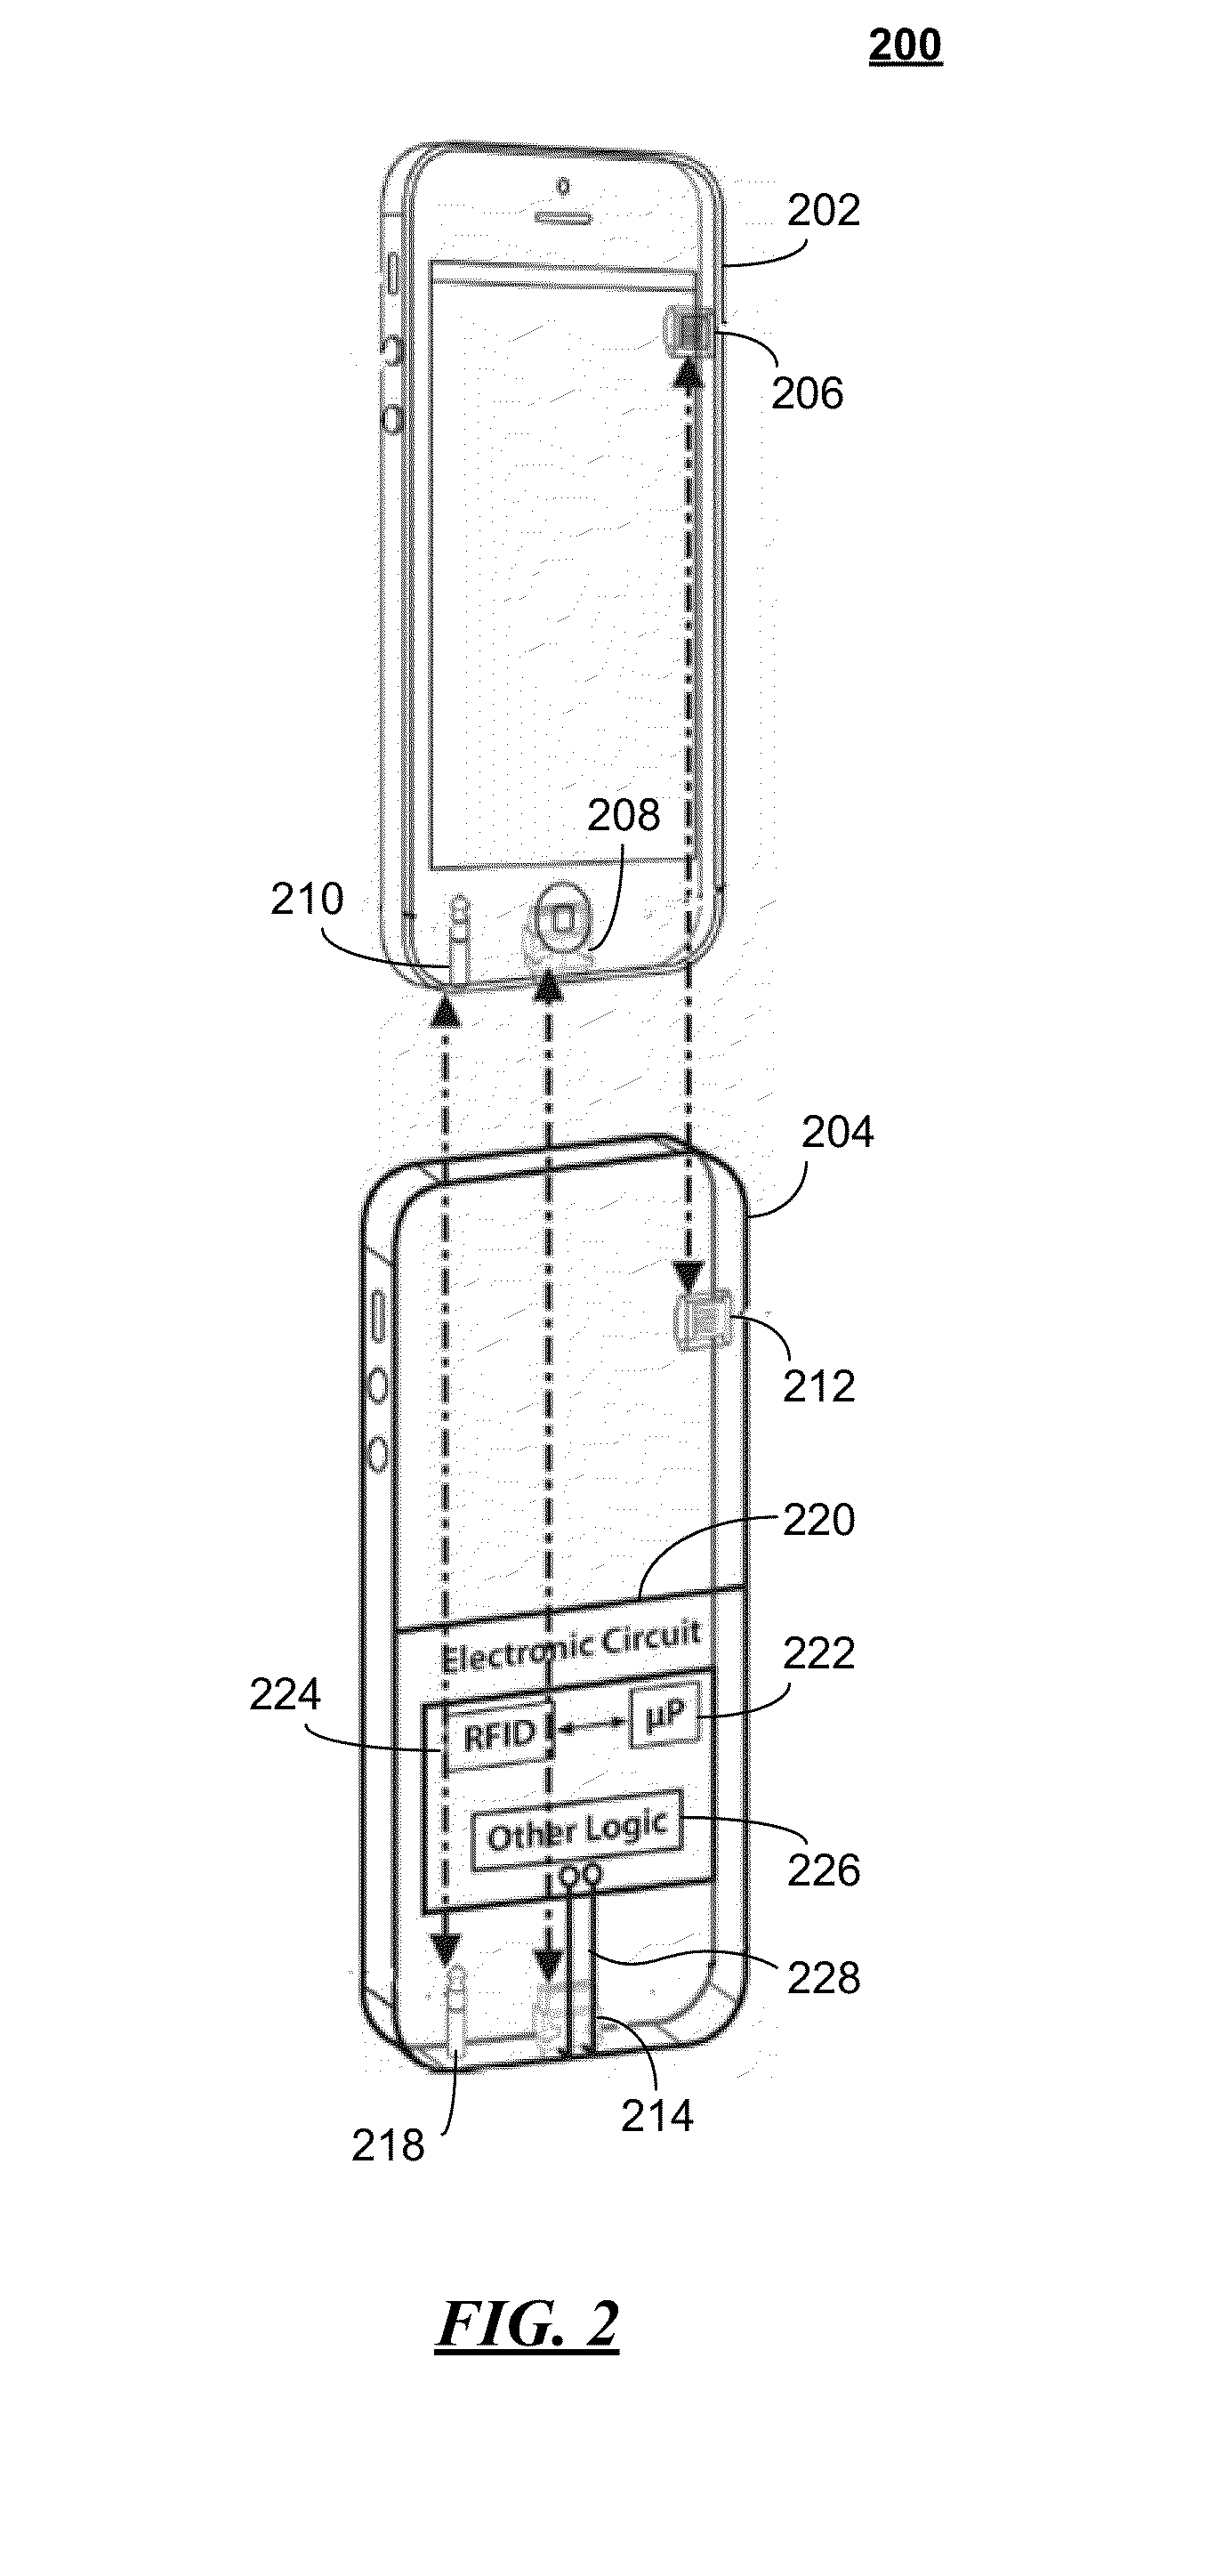 Method and apparatus for providing a toll service and flexible toll device